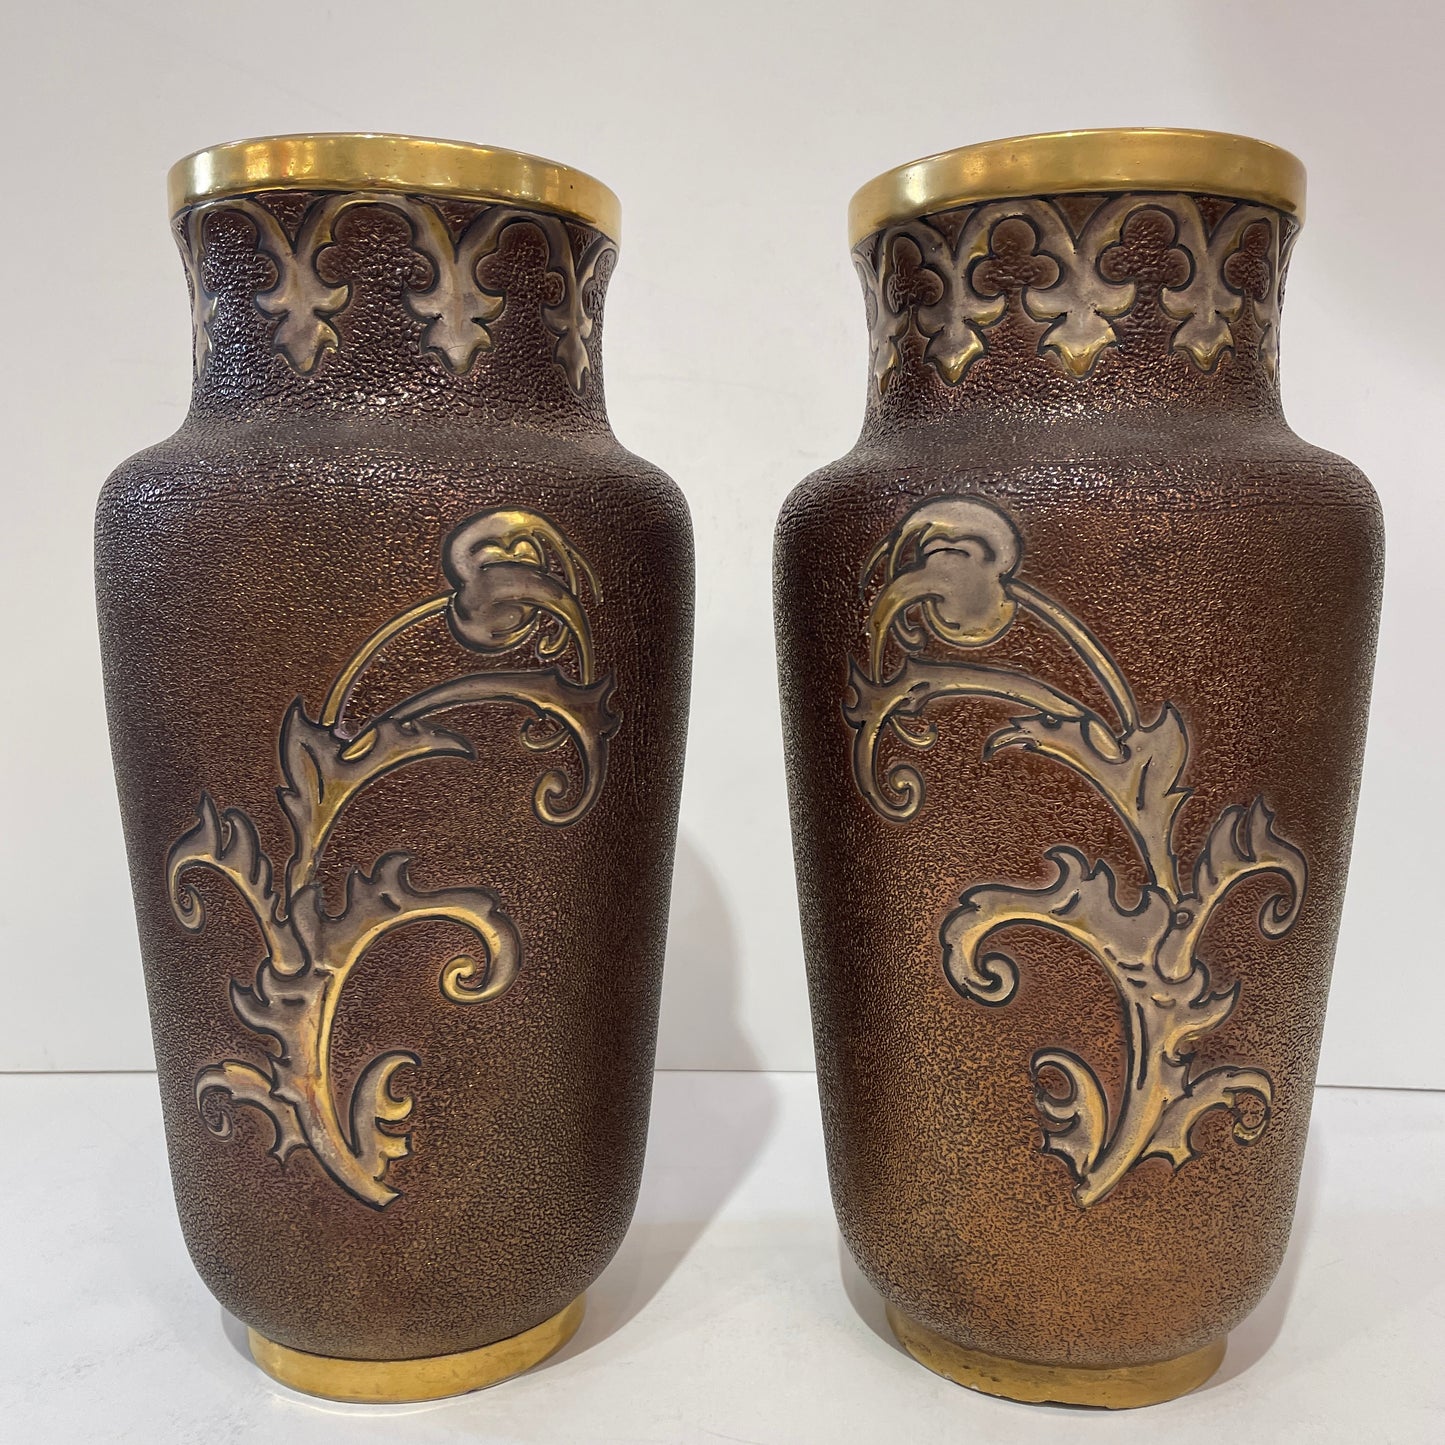 1880 Gien French Faience Pair Majolica Gold & Brown Vases with Armored Knights